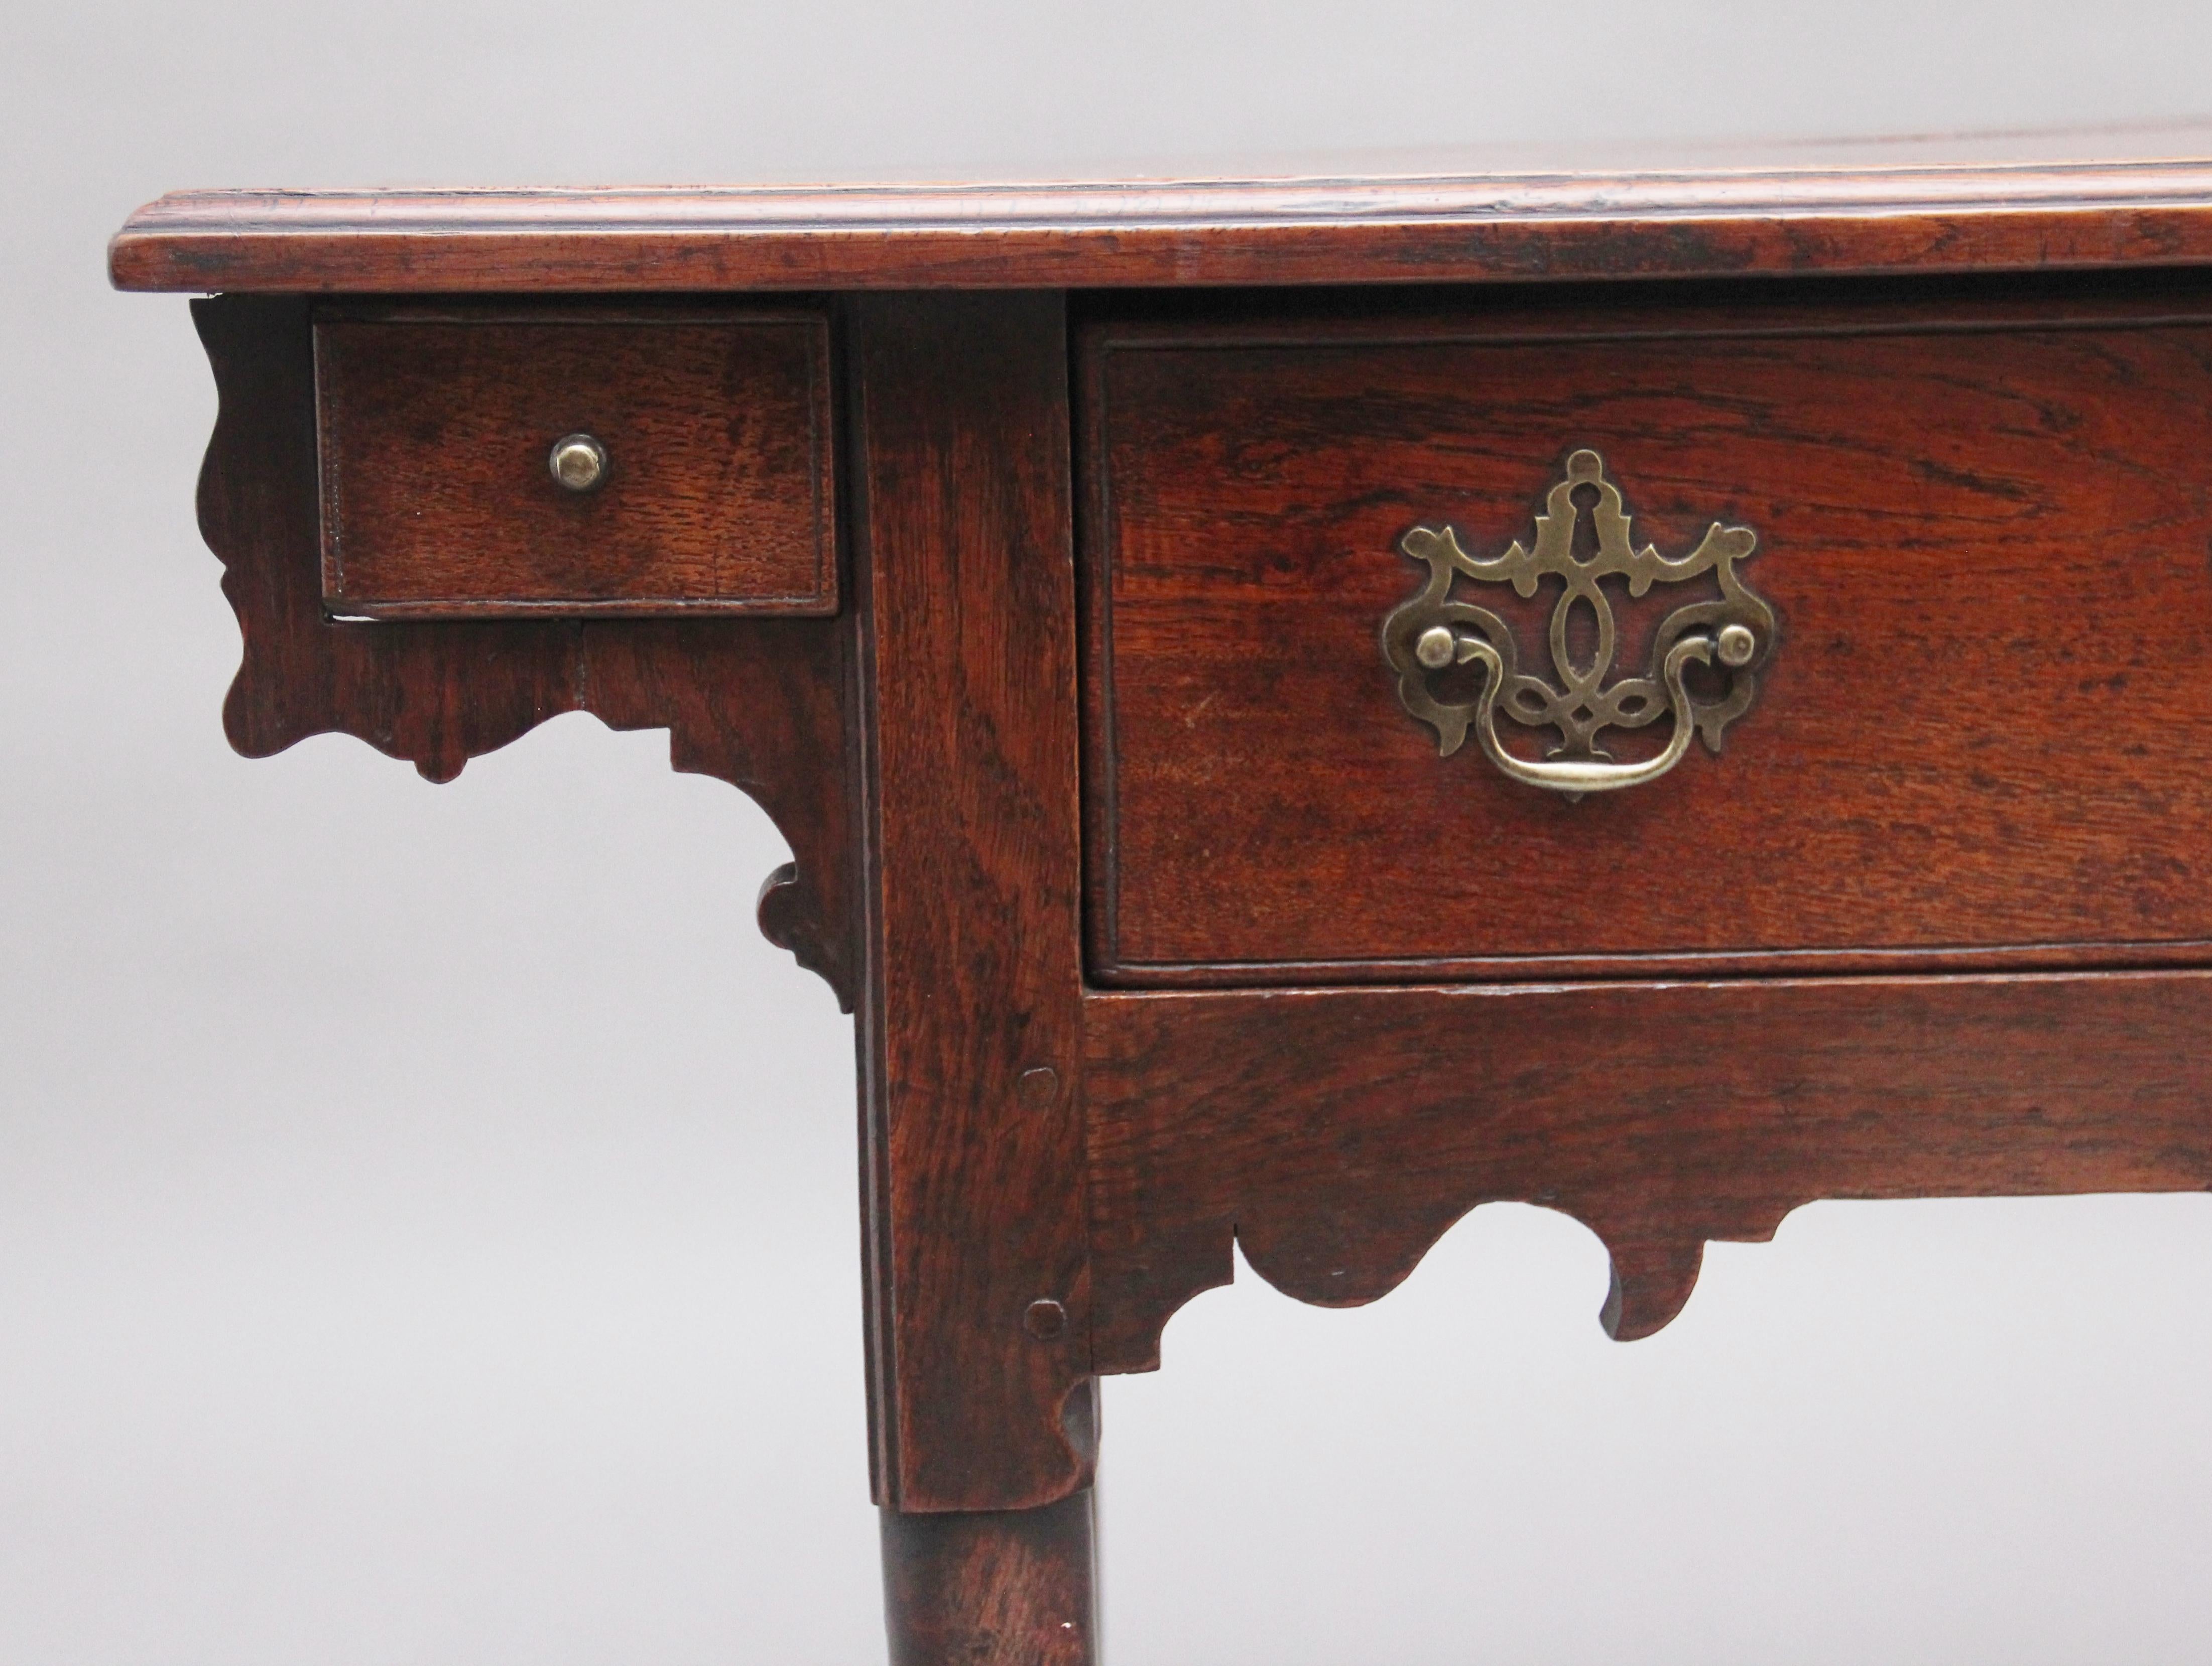 18th Century oak side table, the rectangular moulded edge top above an oak lined frieze drawer with the original brass fret handles and escutcheon, the table having two small drawers either end which are housed within decorative shaped corner